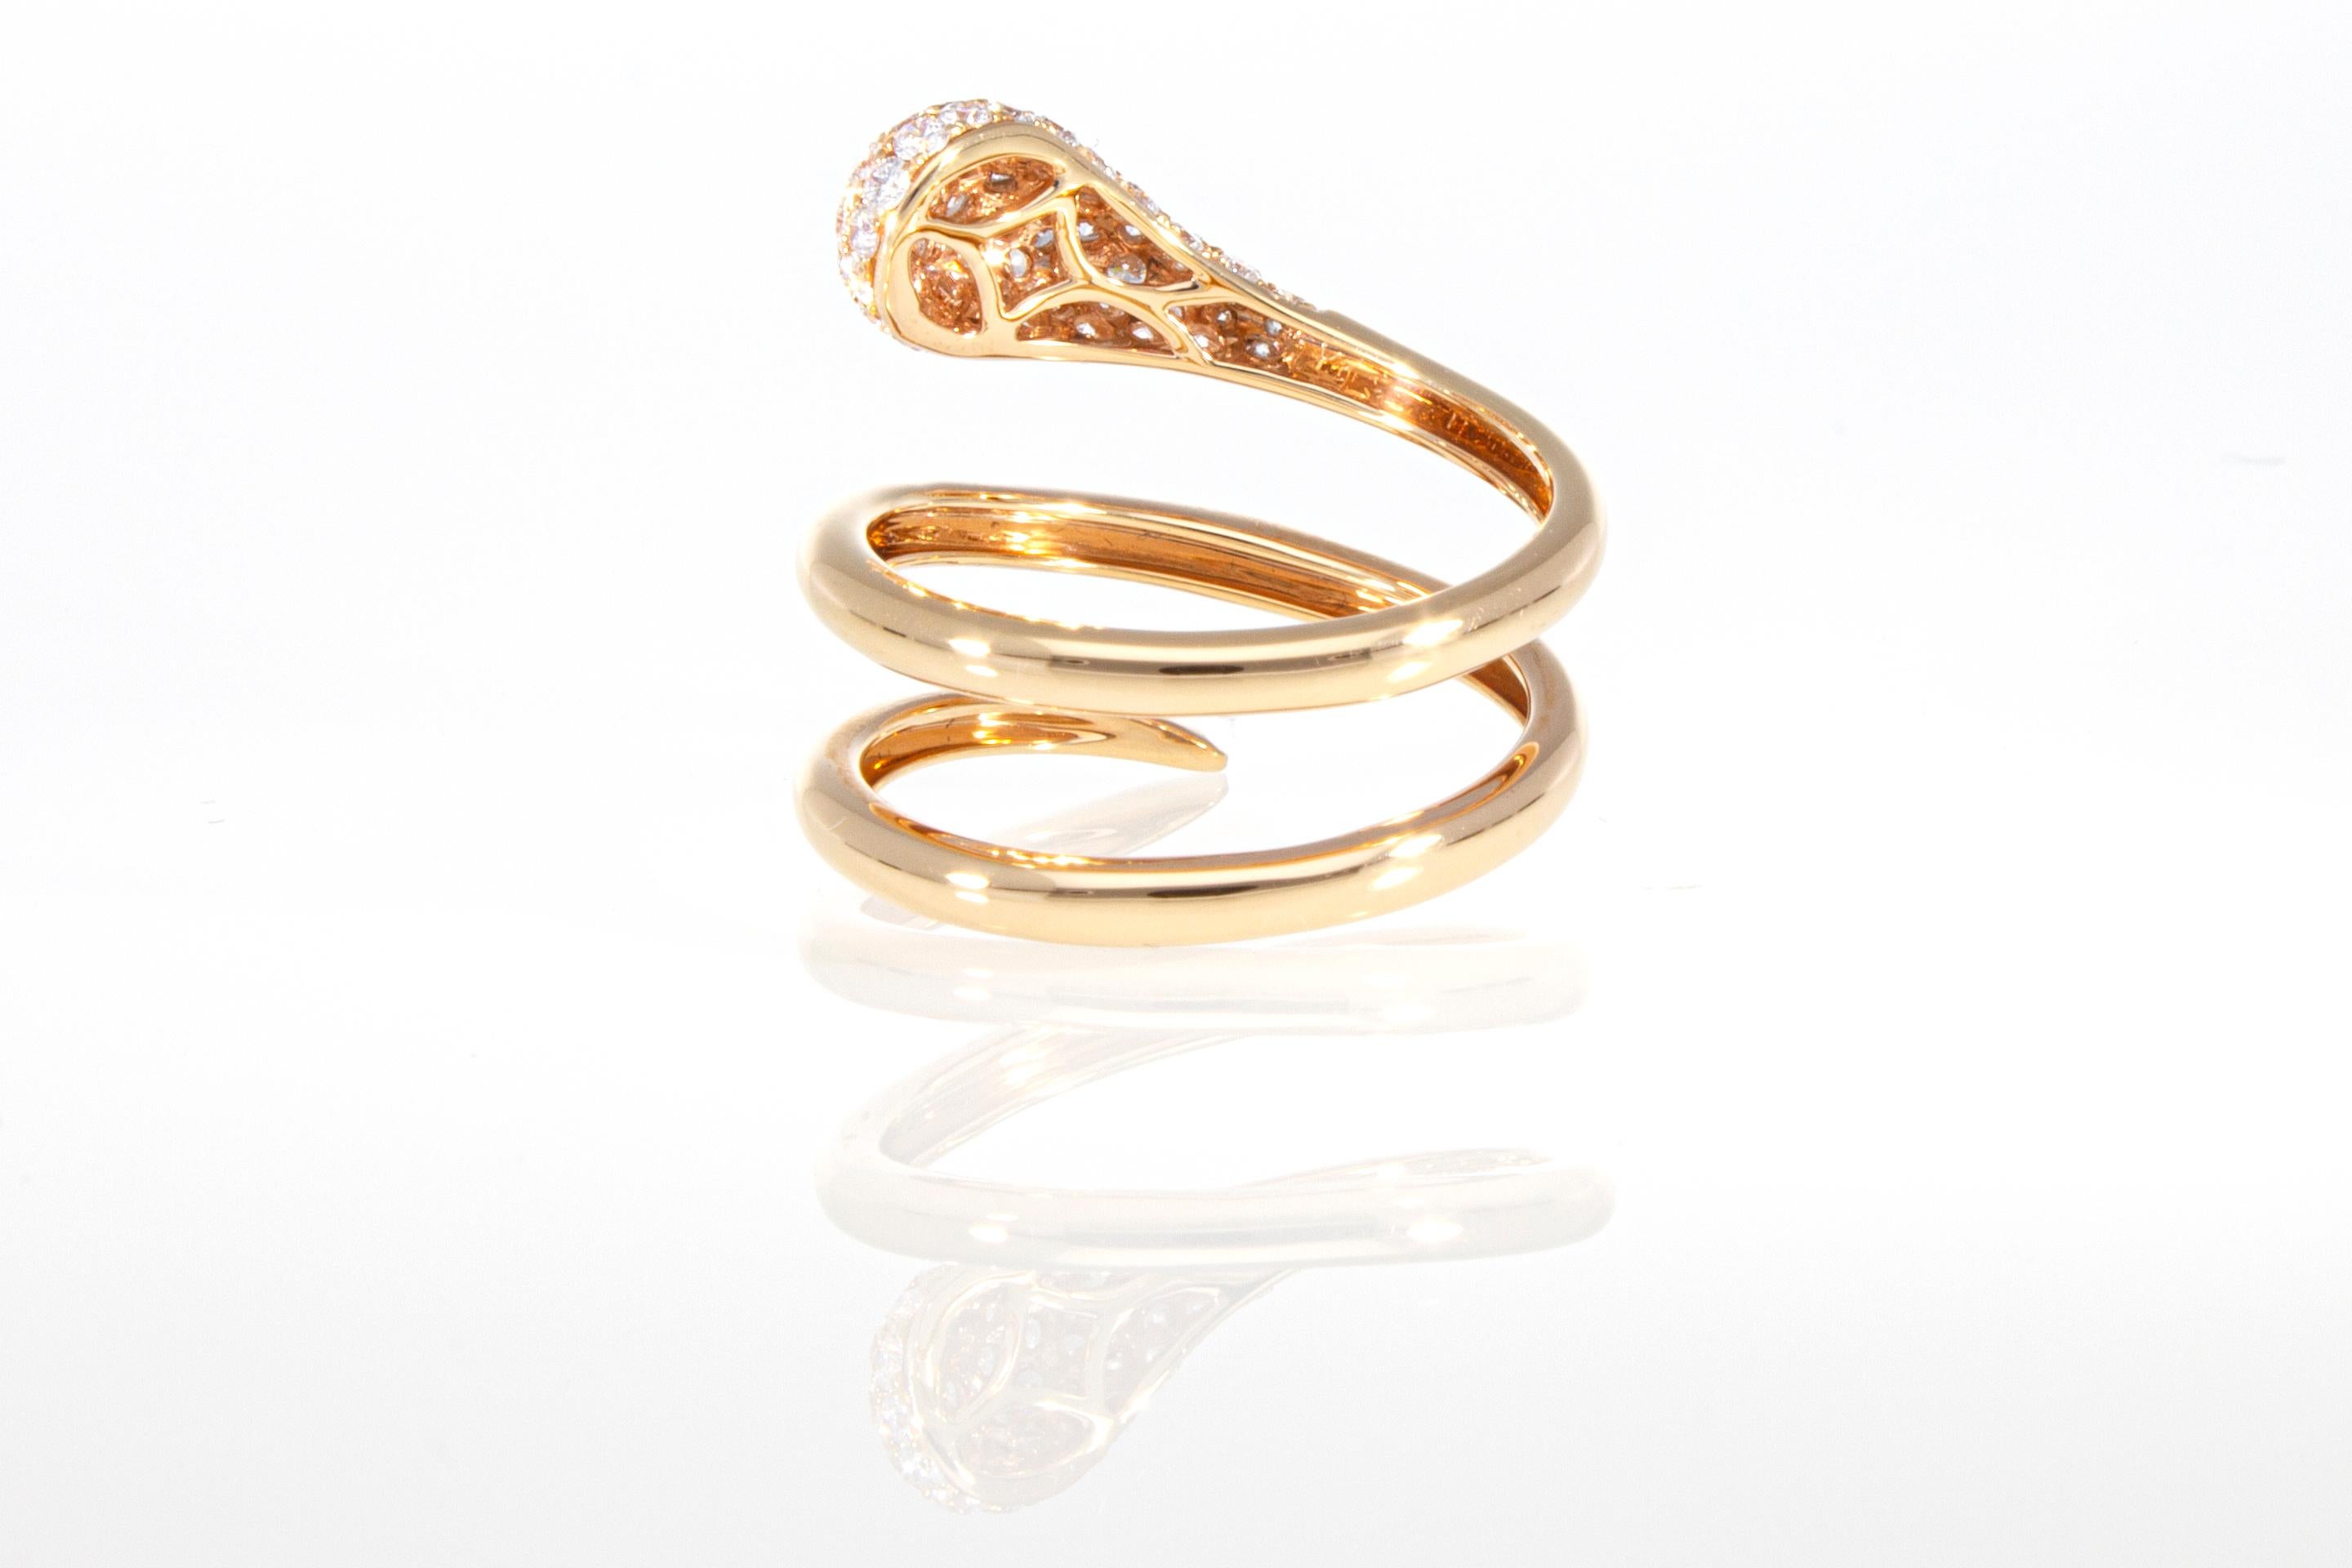 Ring with 0.73 Ct of Diamonds, 18Kt Gold Snake Model For Sale 1